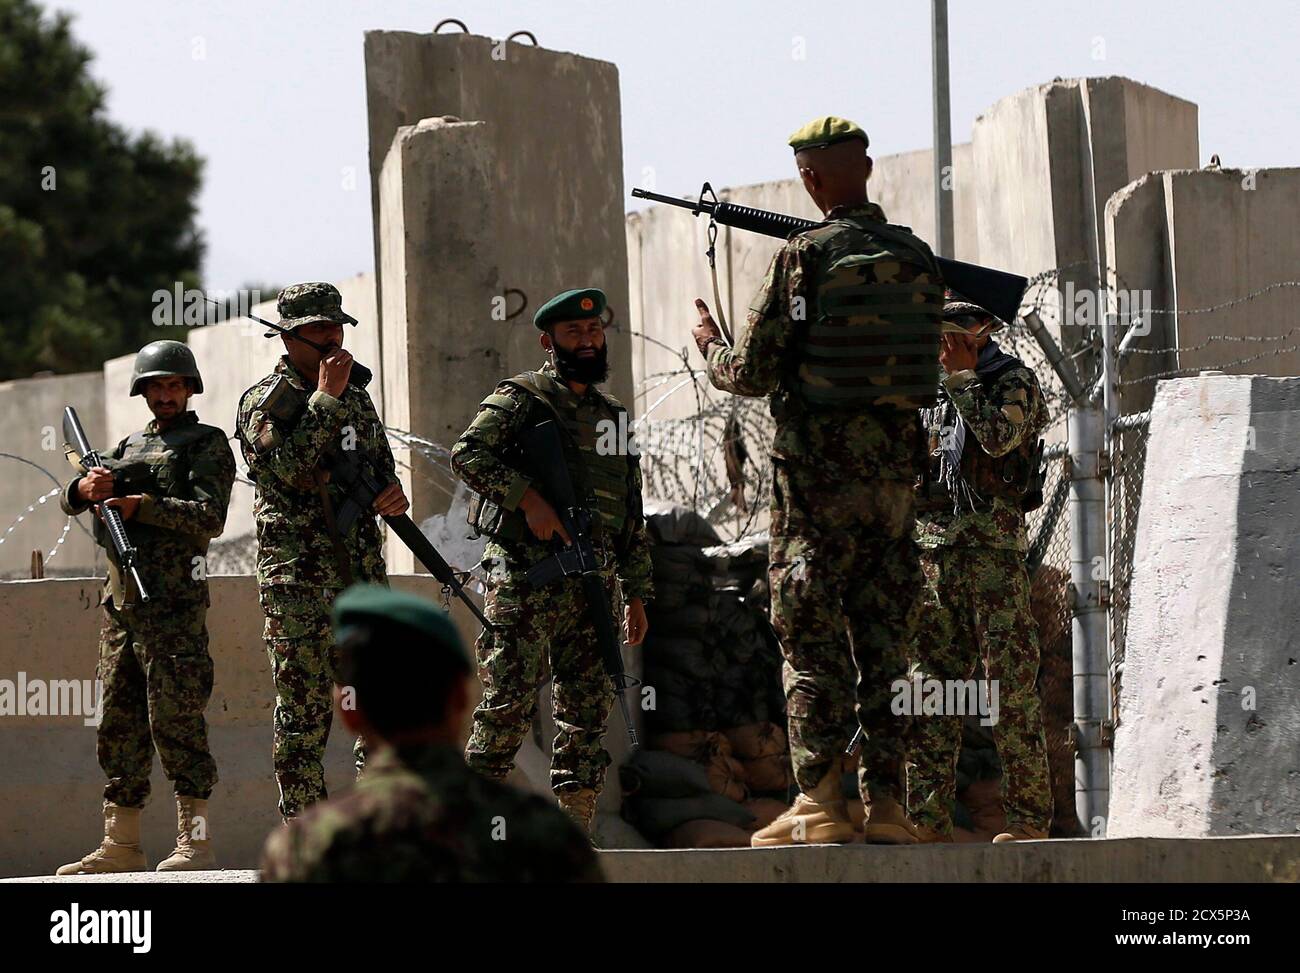 Afghan National Army (ANA) soldiers keep watch at the gate of a British-run  military training academy Camp Qargha, in Kabul August 5, 2014. One  serviceman was killed and 14 wounded, including a